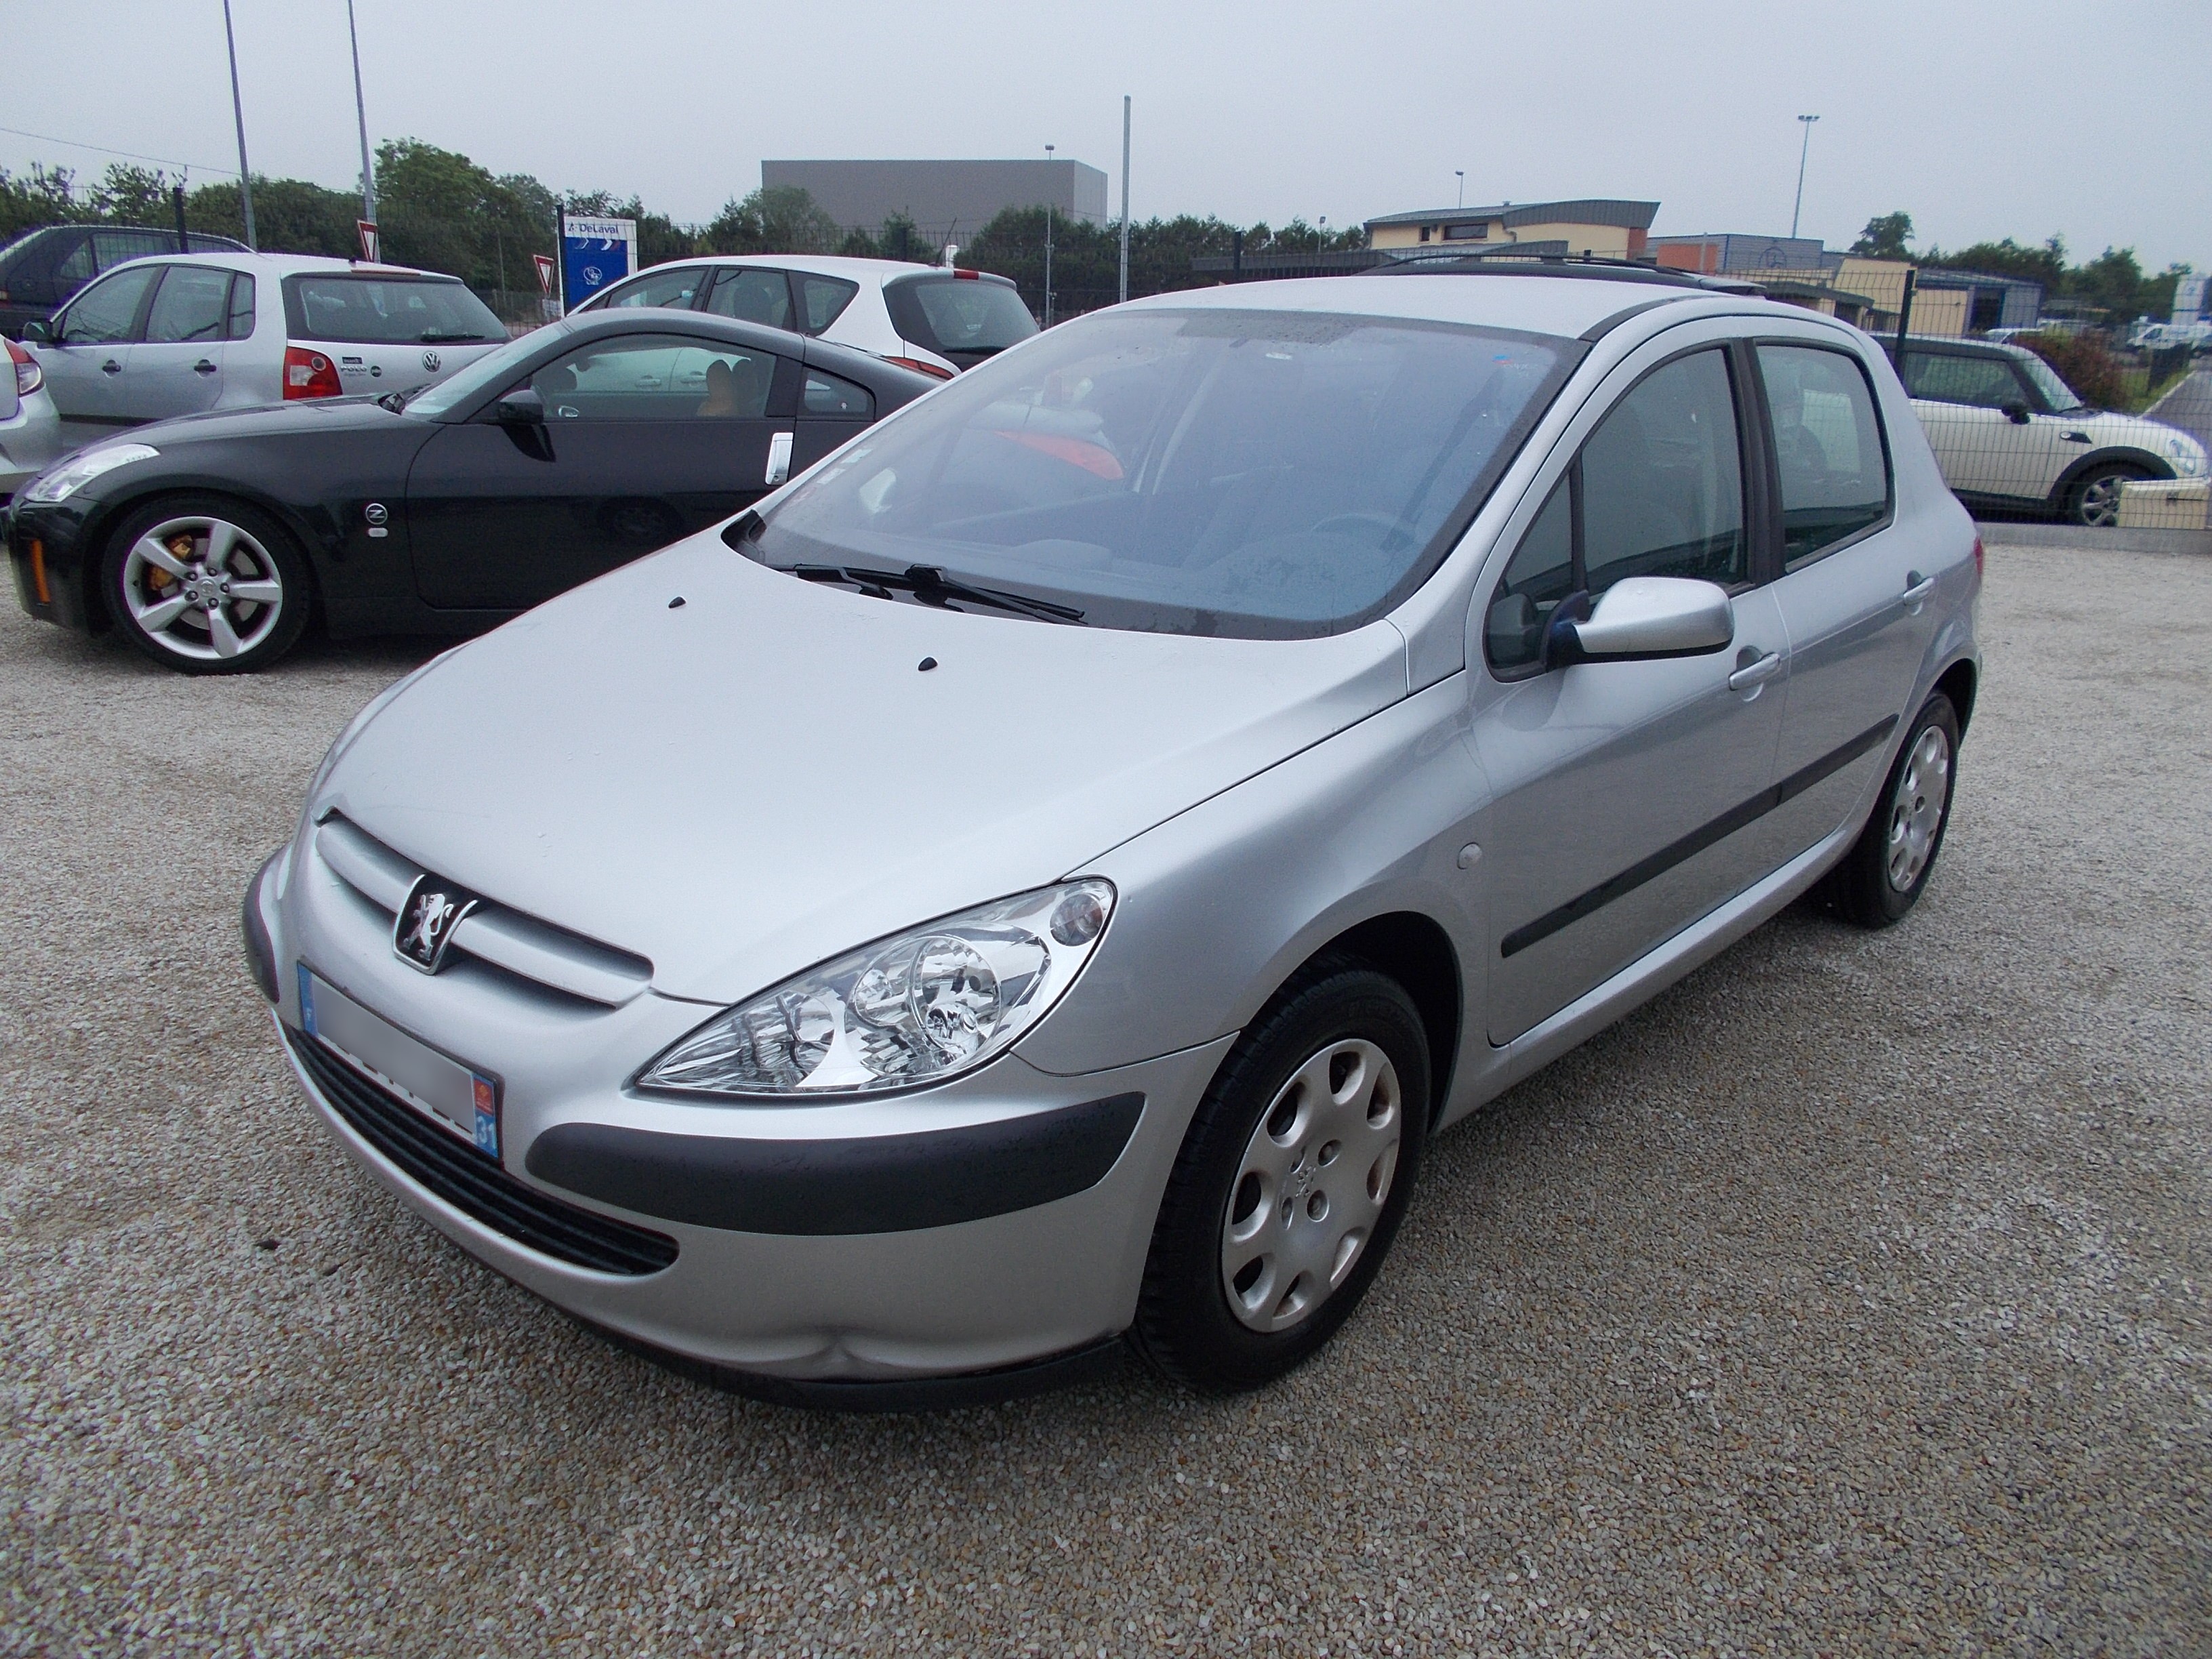 Peugeot 307 2.0 HDI 90 CH Anna Rose Automobiles